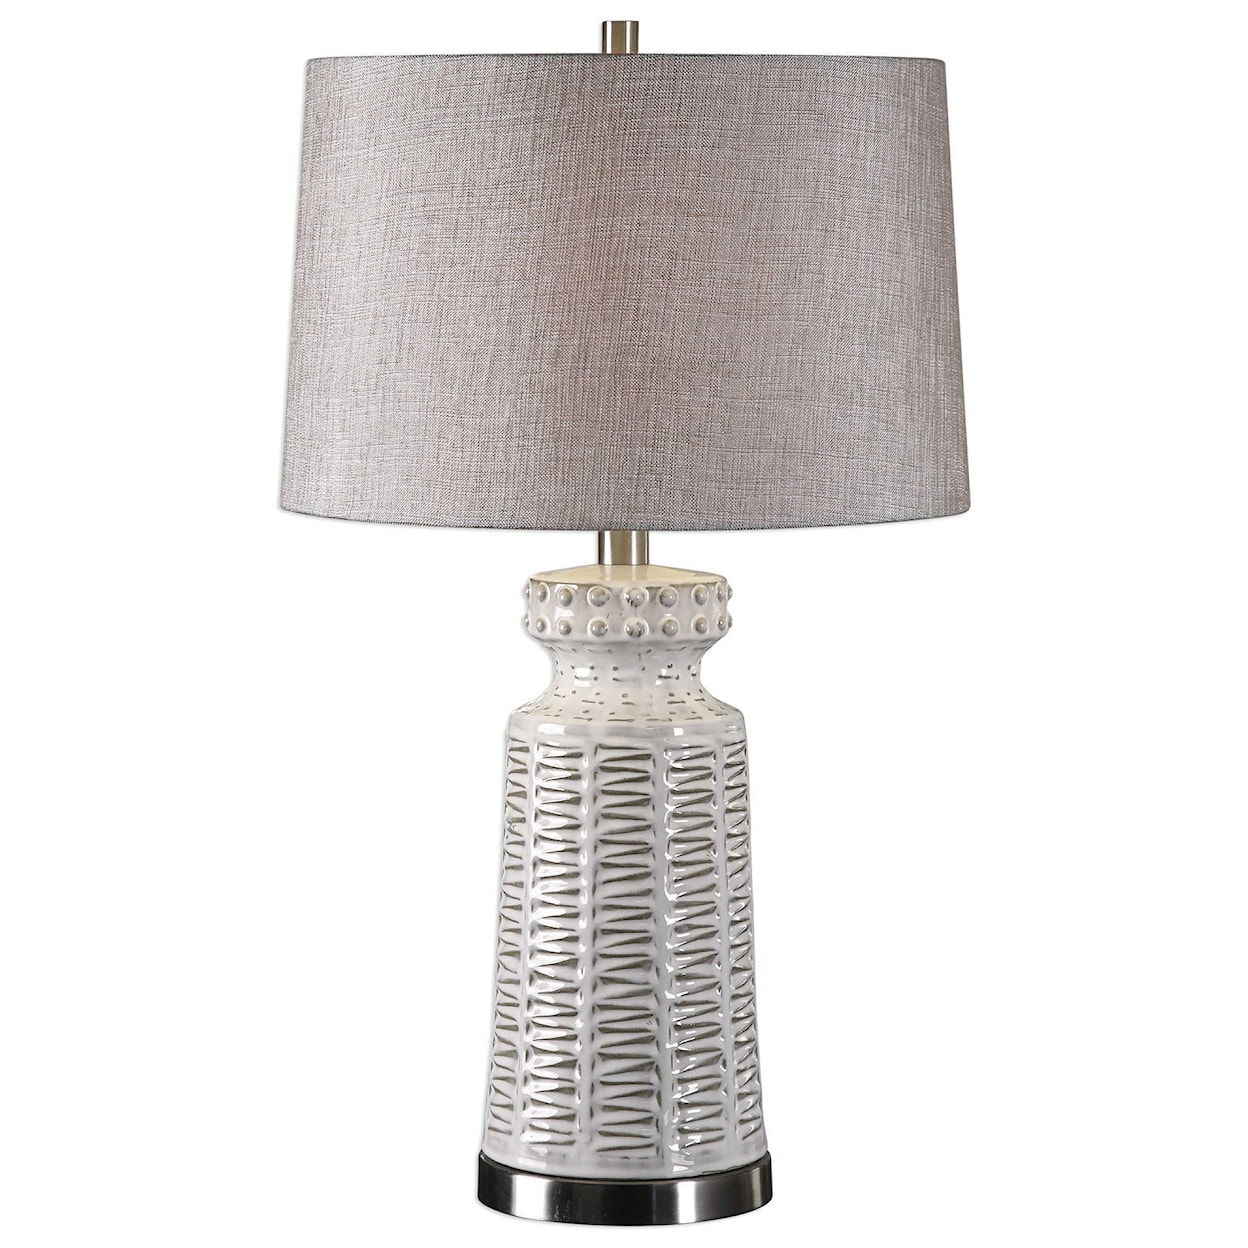 Uttermost Table Lamps Kansa Distressed White Table Lamp